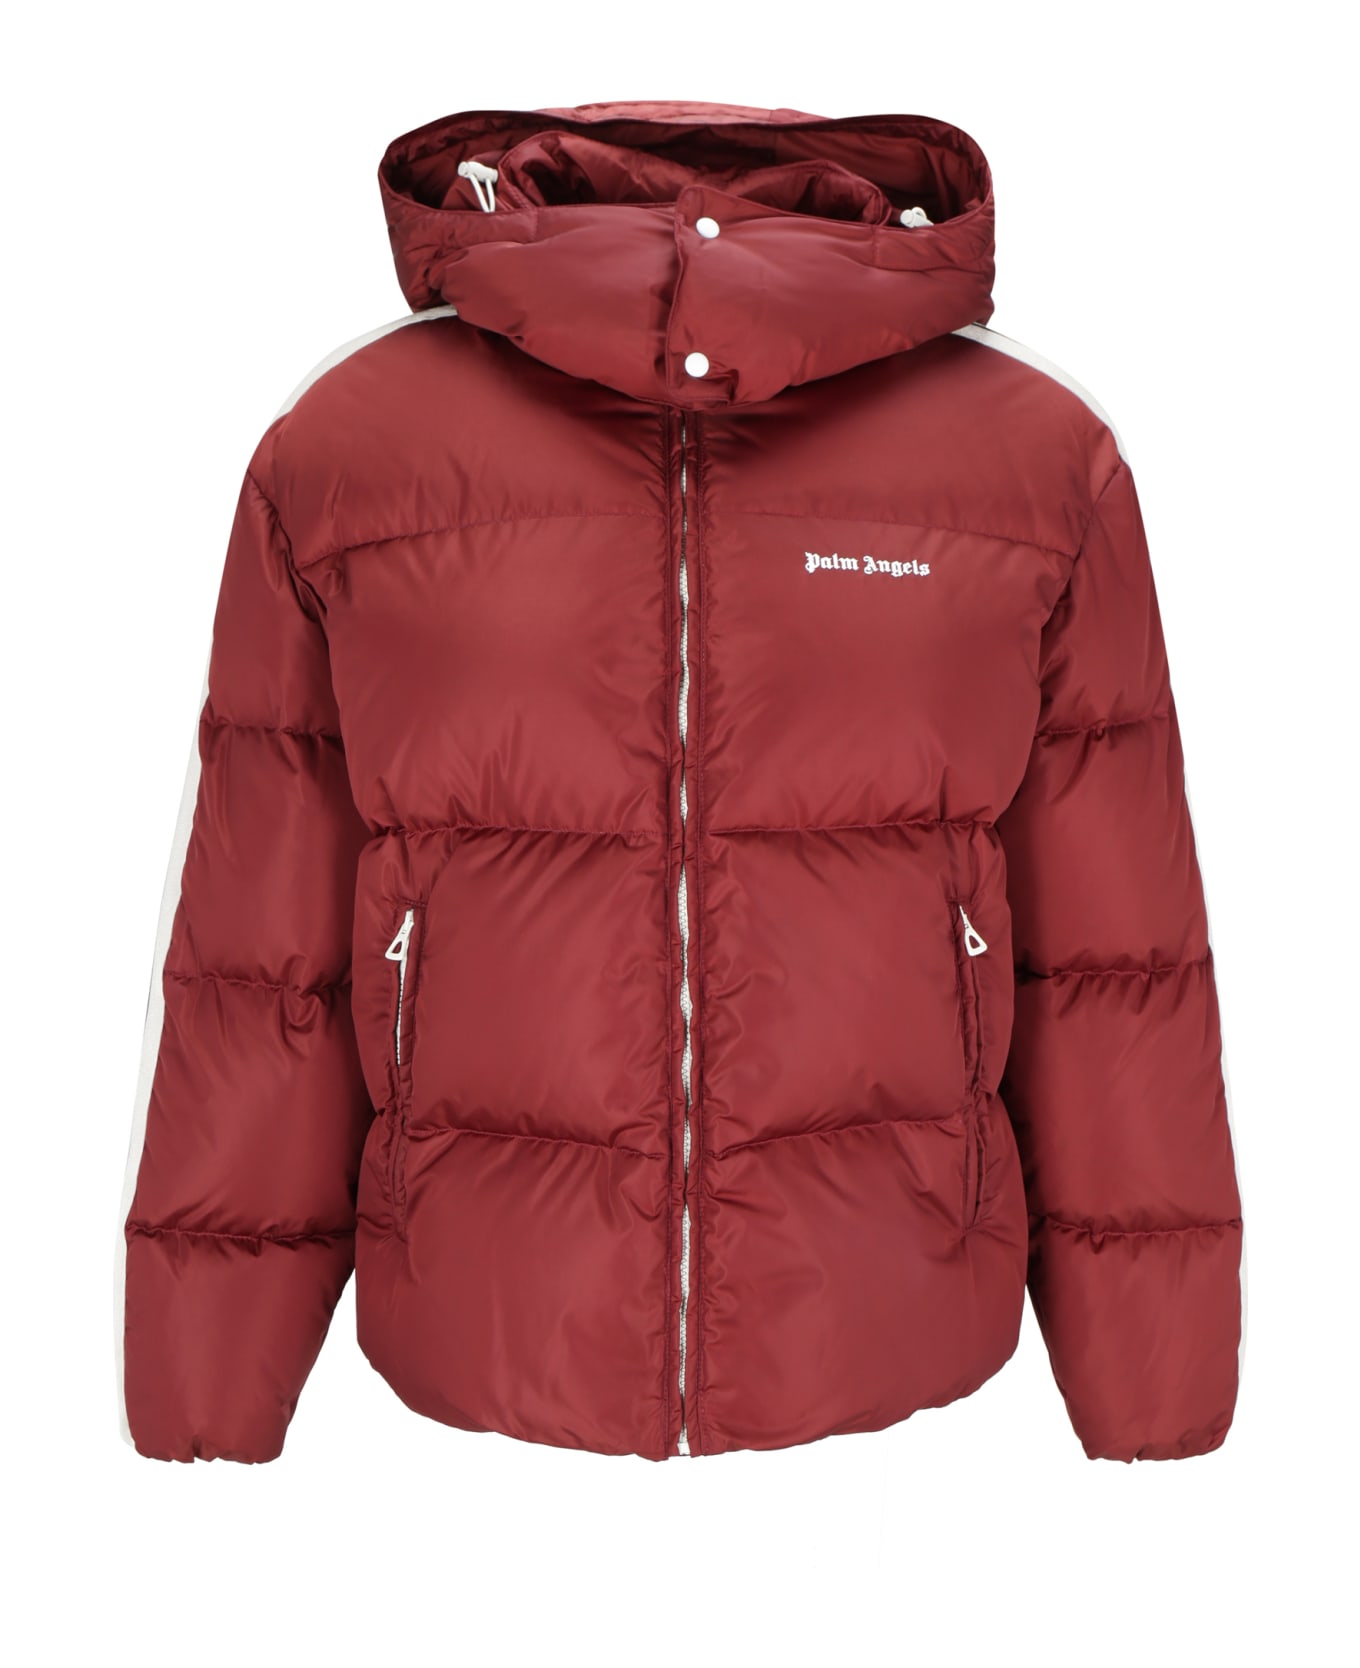 Palm Angels Hooded Nylon Down Jacket - Red